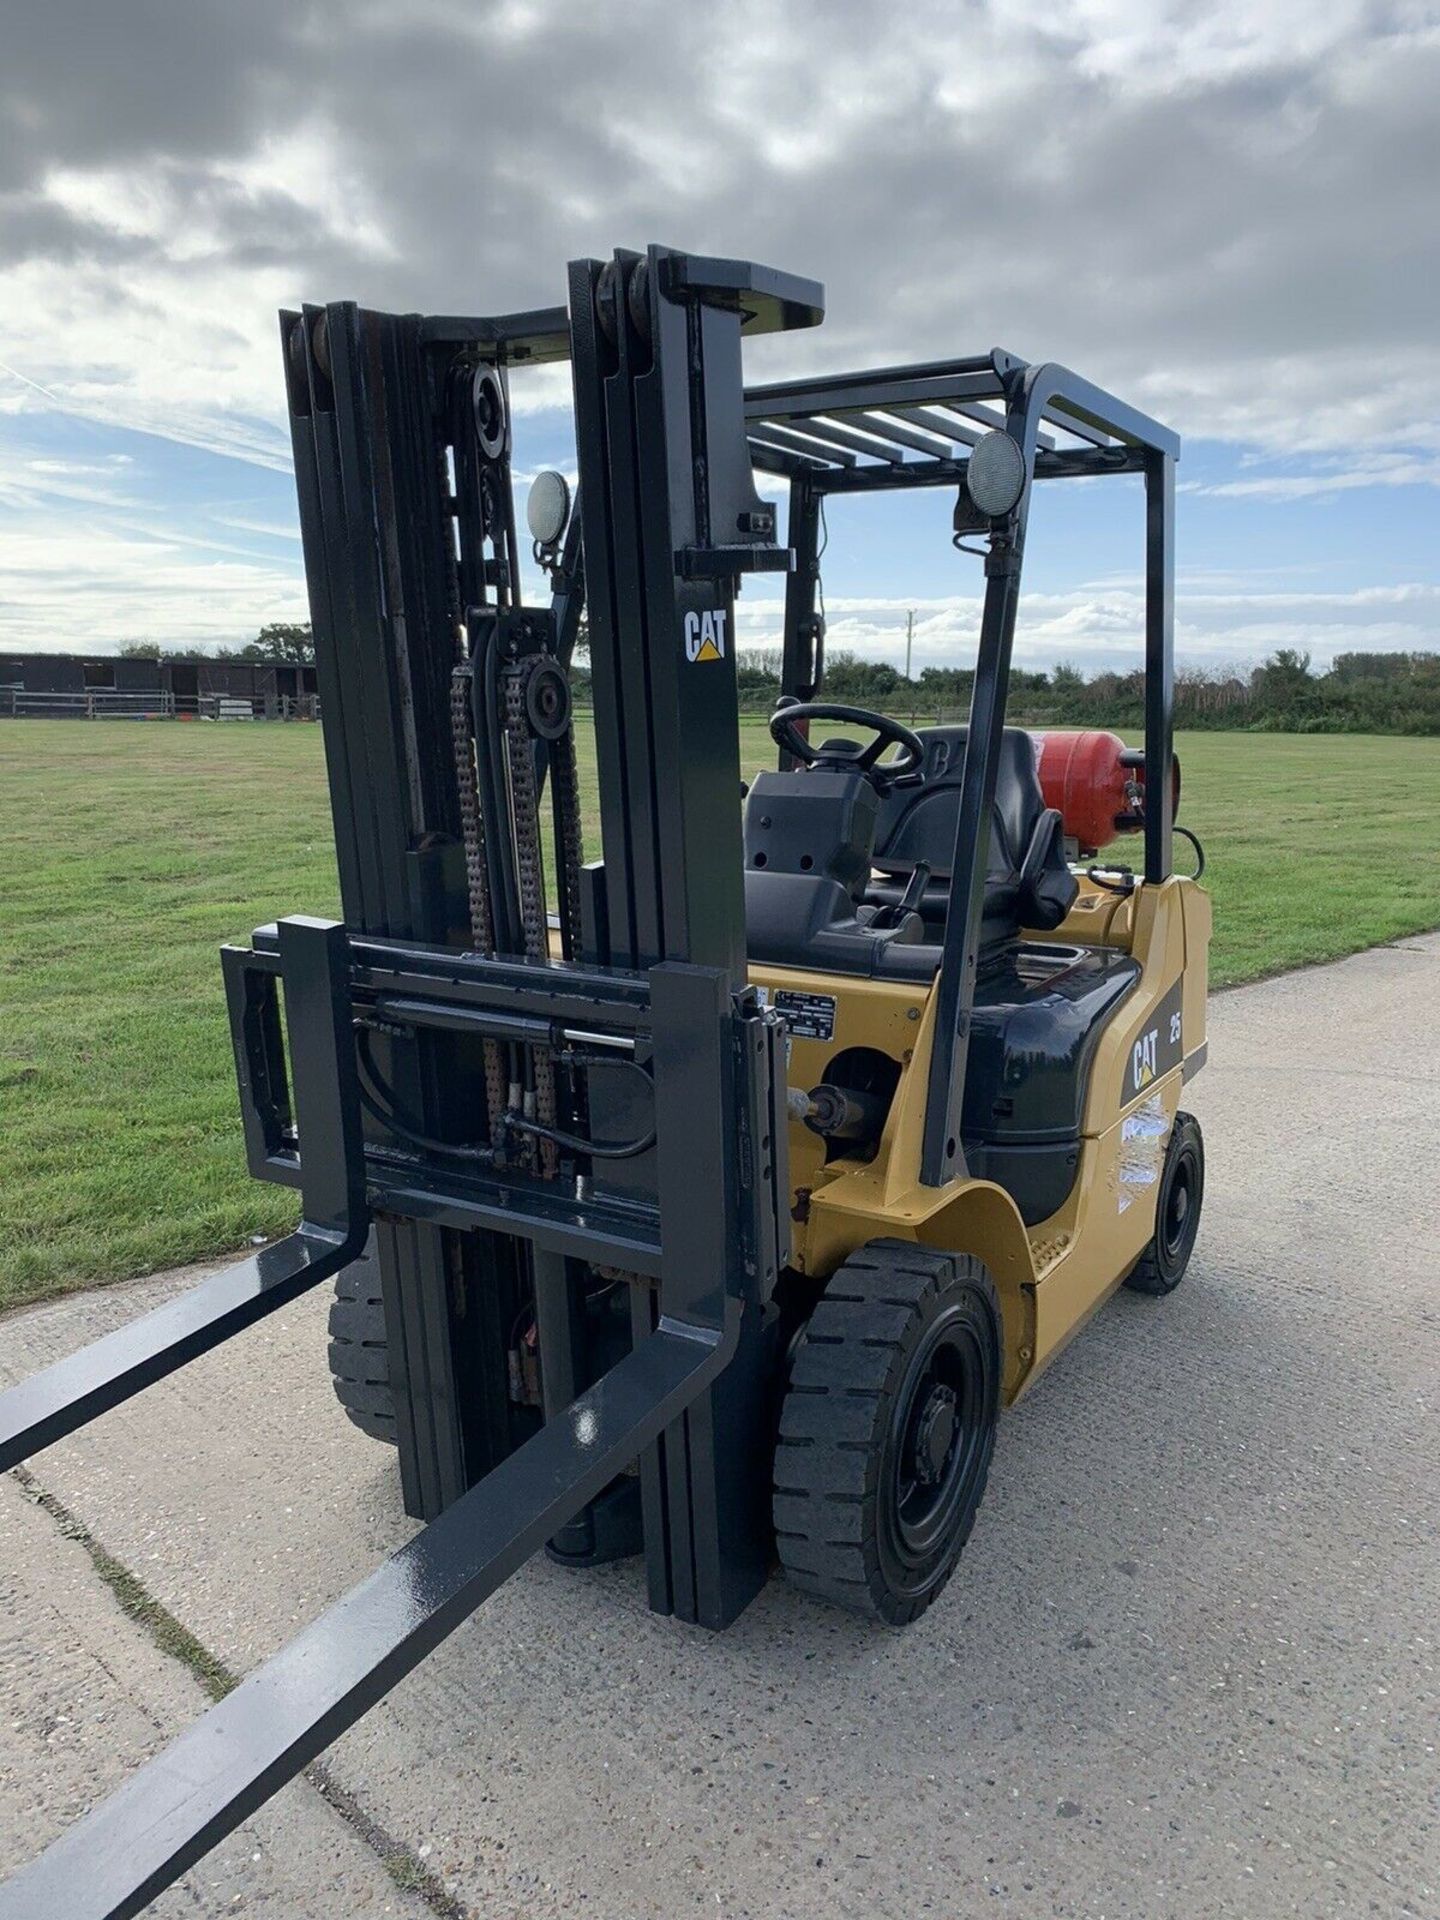 Caterpillar 2.5 Tonne Gas Container Spec Forklift - Image 6 of 6